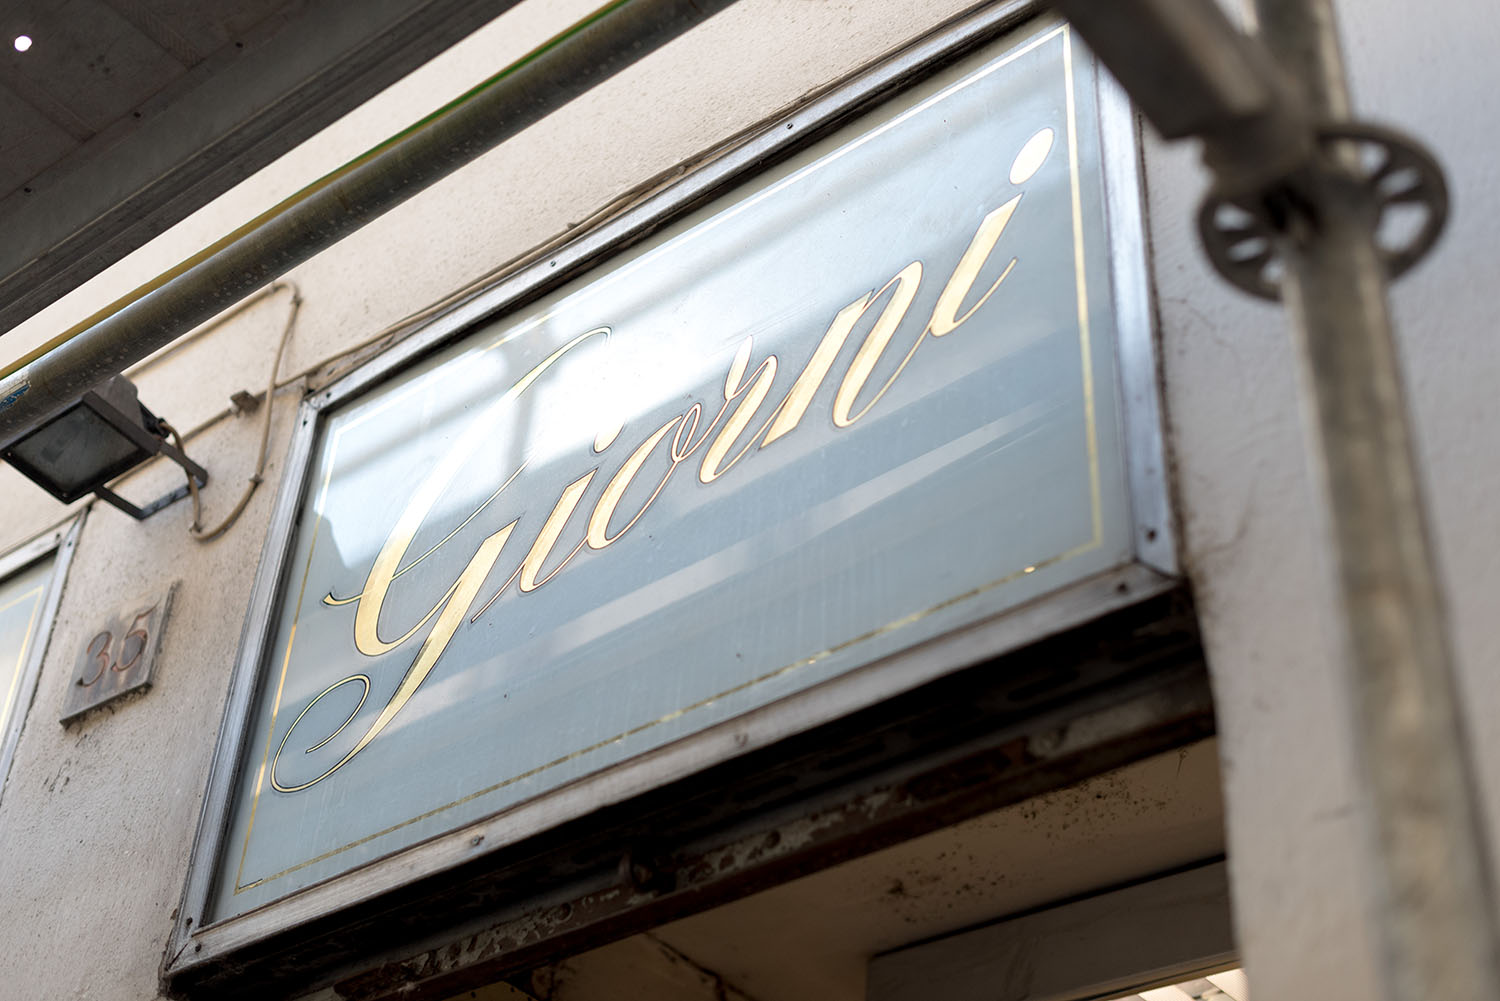 The vintage sign at Giorni in Florence, Italy, as captured by top Winnipeg travel blogger Cee Fardoe of Coco & Vera